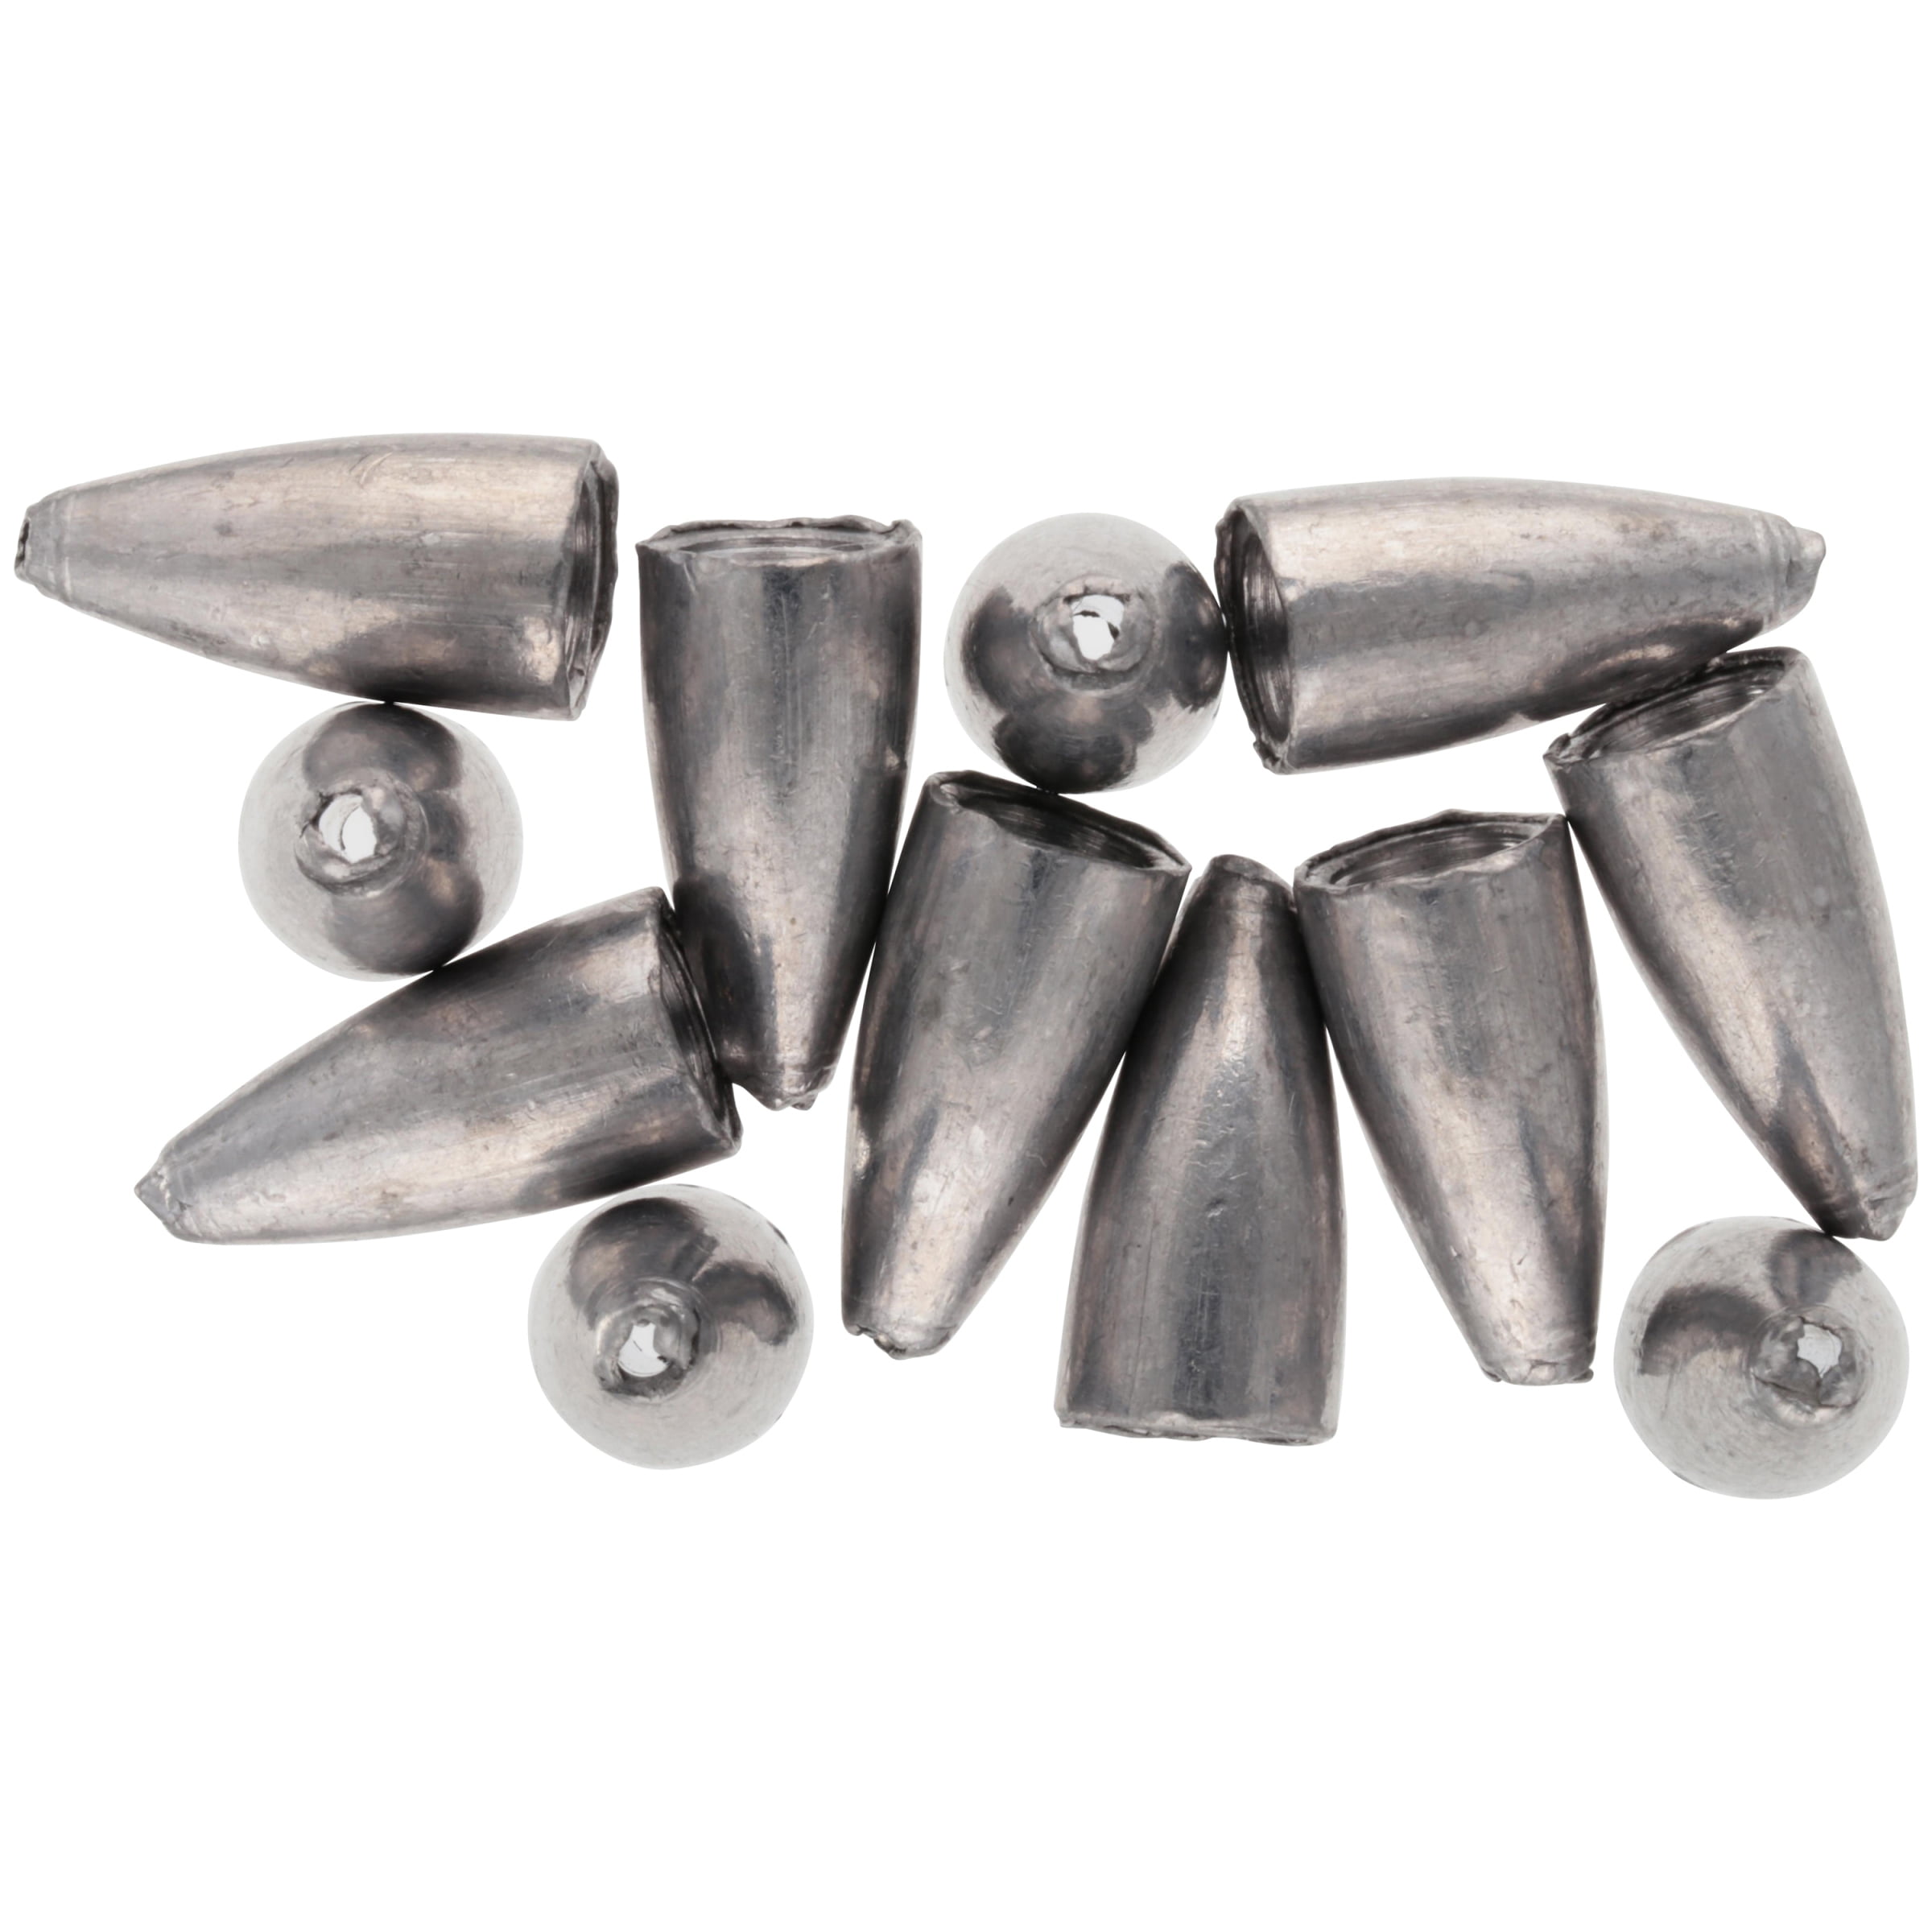 Fishing Tackle Accessories, Bullet Fishing Weights, Fishing Lead Sinker